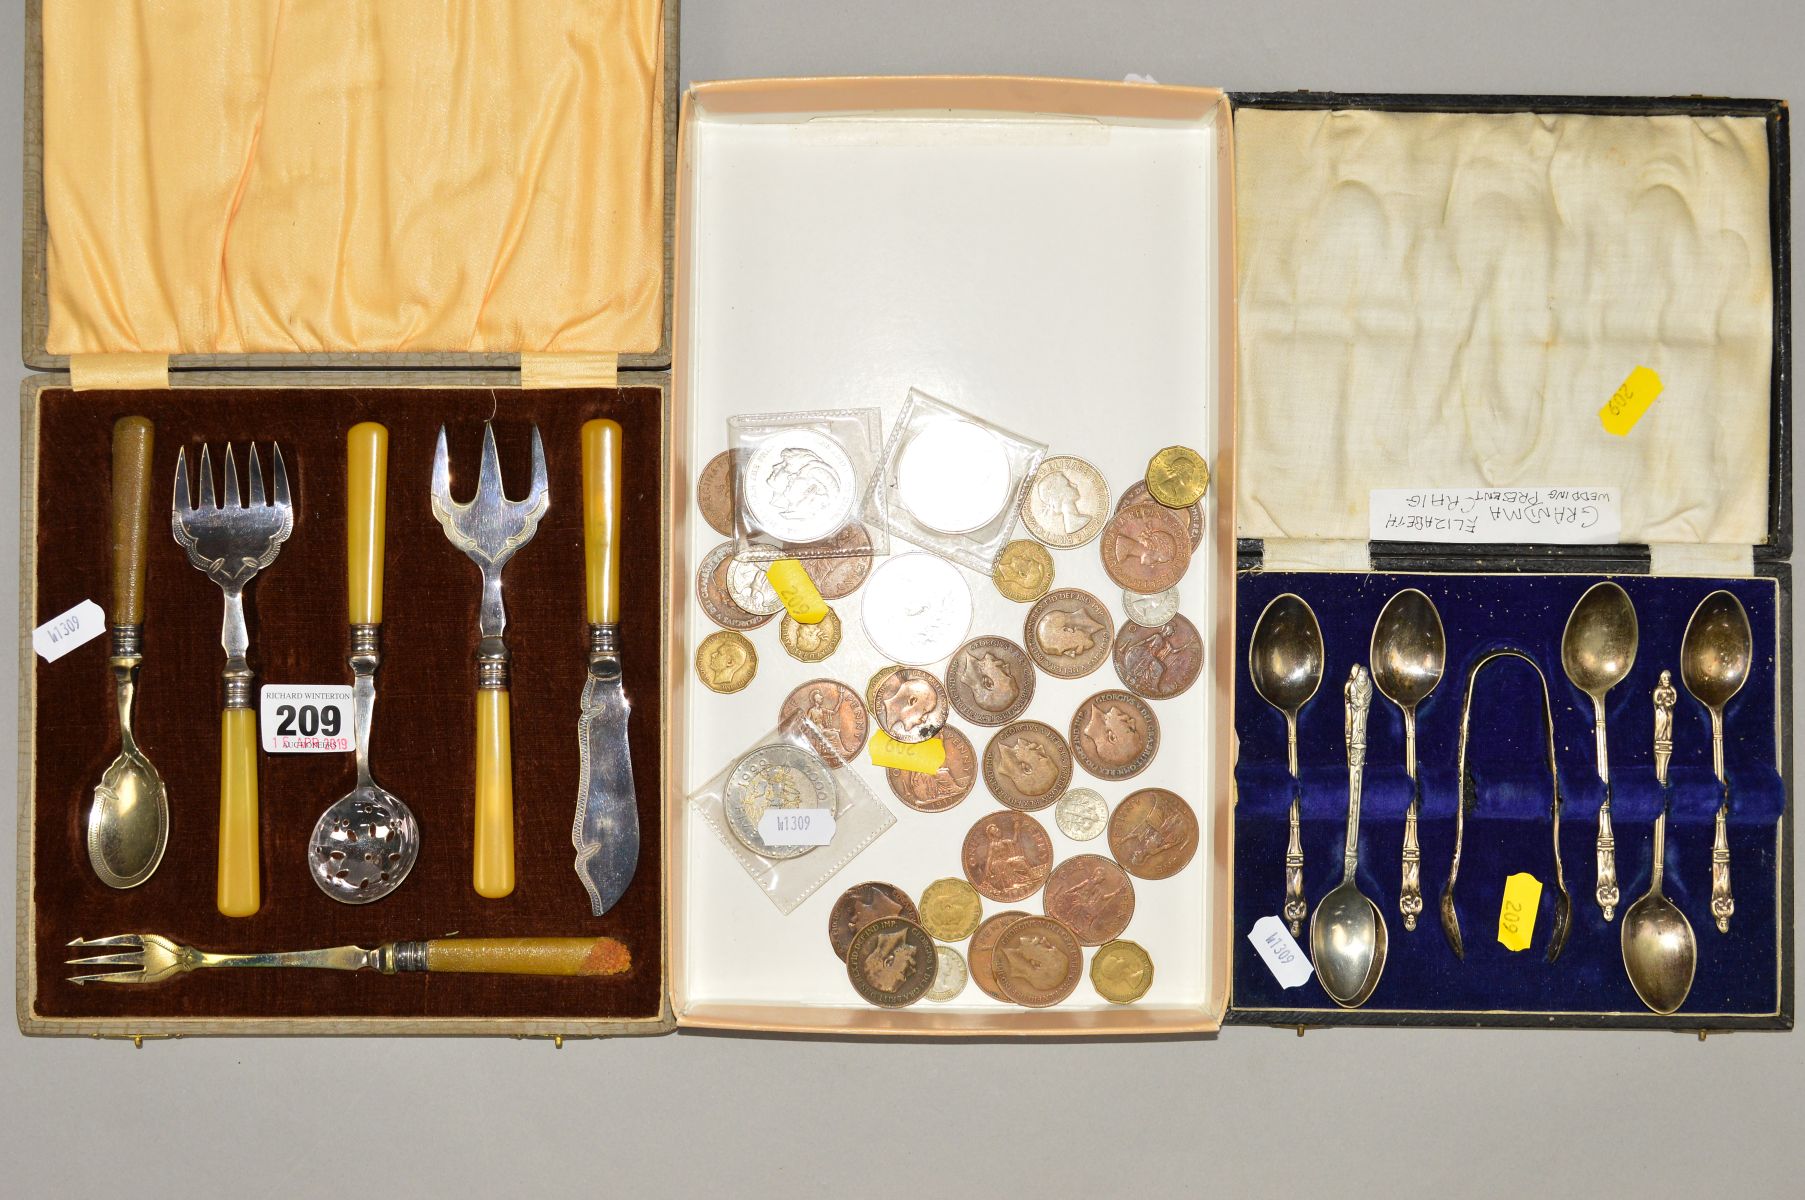 A CASED SET OF EPNS SERVING UTENSILS, s.d. to two handles, together with a cased set of plated